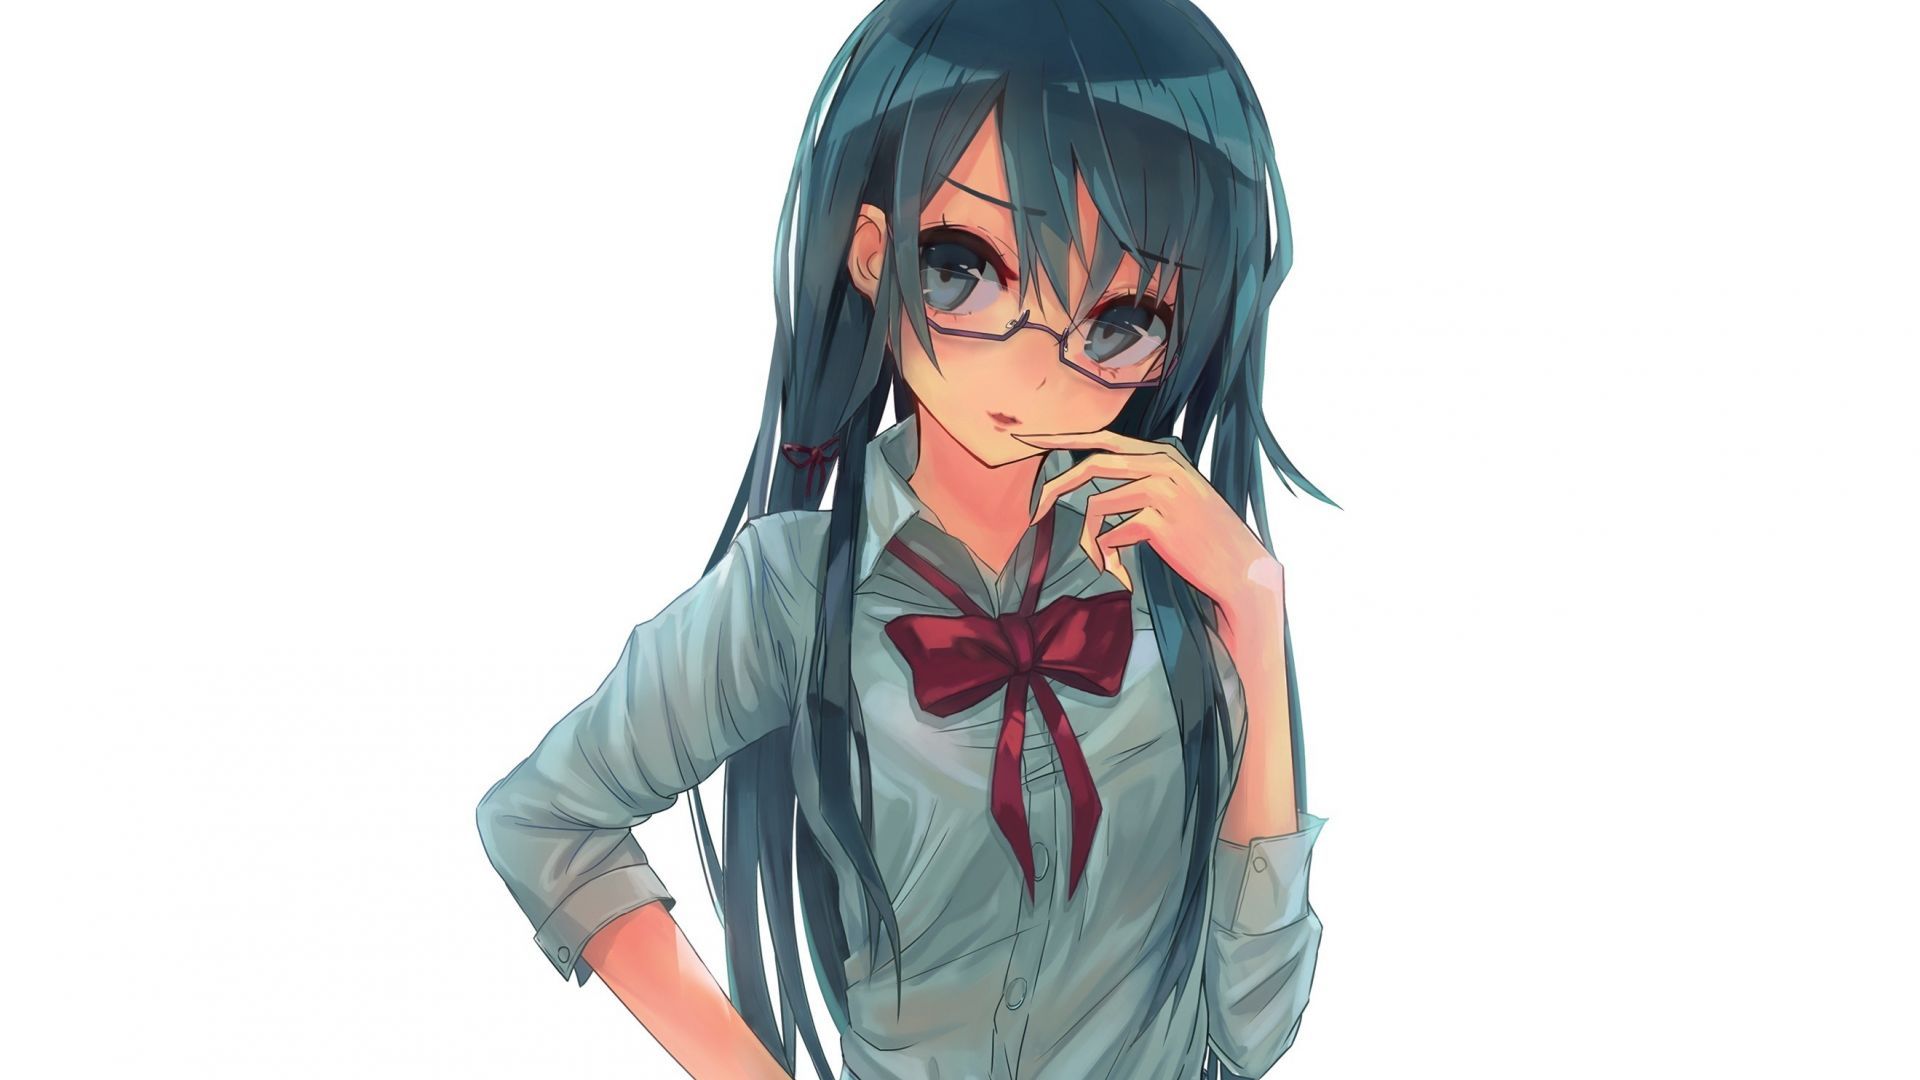 image Of Anime Girl With Glasses